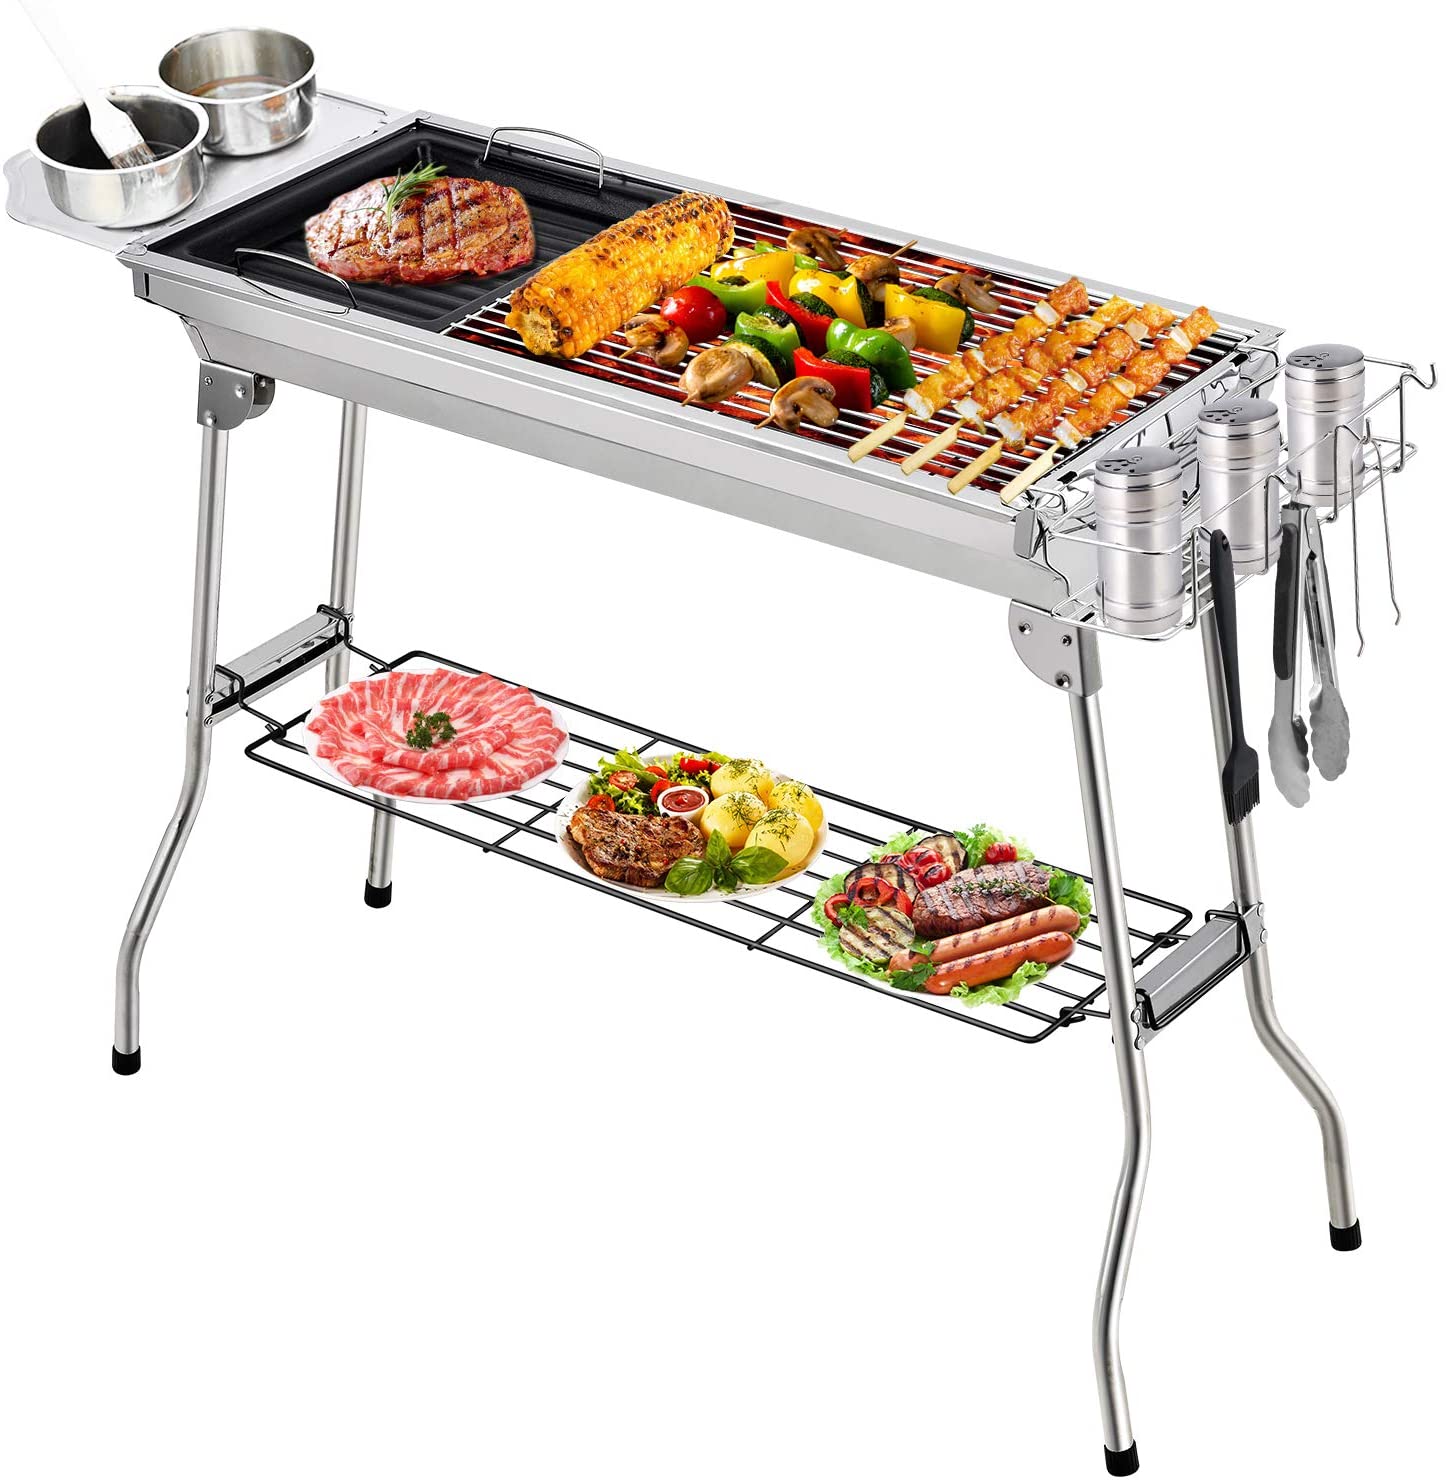 Barbecue Grill, Portable Barbecue Charcoal Grill Foldable Charcoal BBQ Grill Set Stainless Steel, Smoker Grill for Outdoor Cooking Camping Picnic Outdoor Garden Charcoal BBQ Grill Party